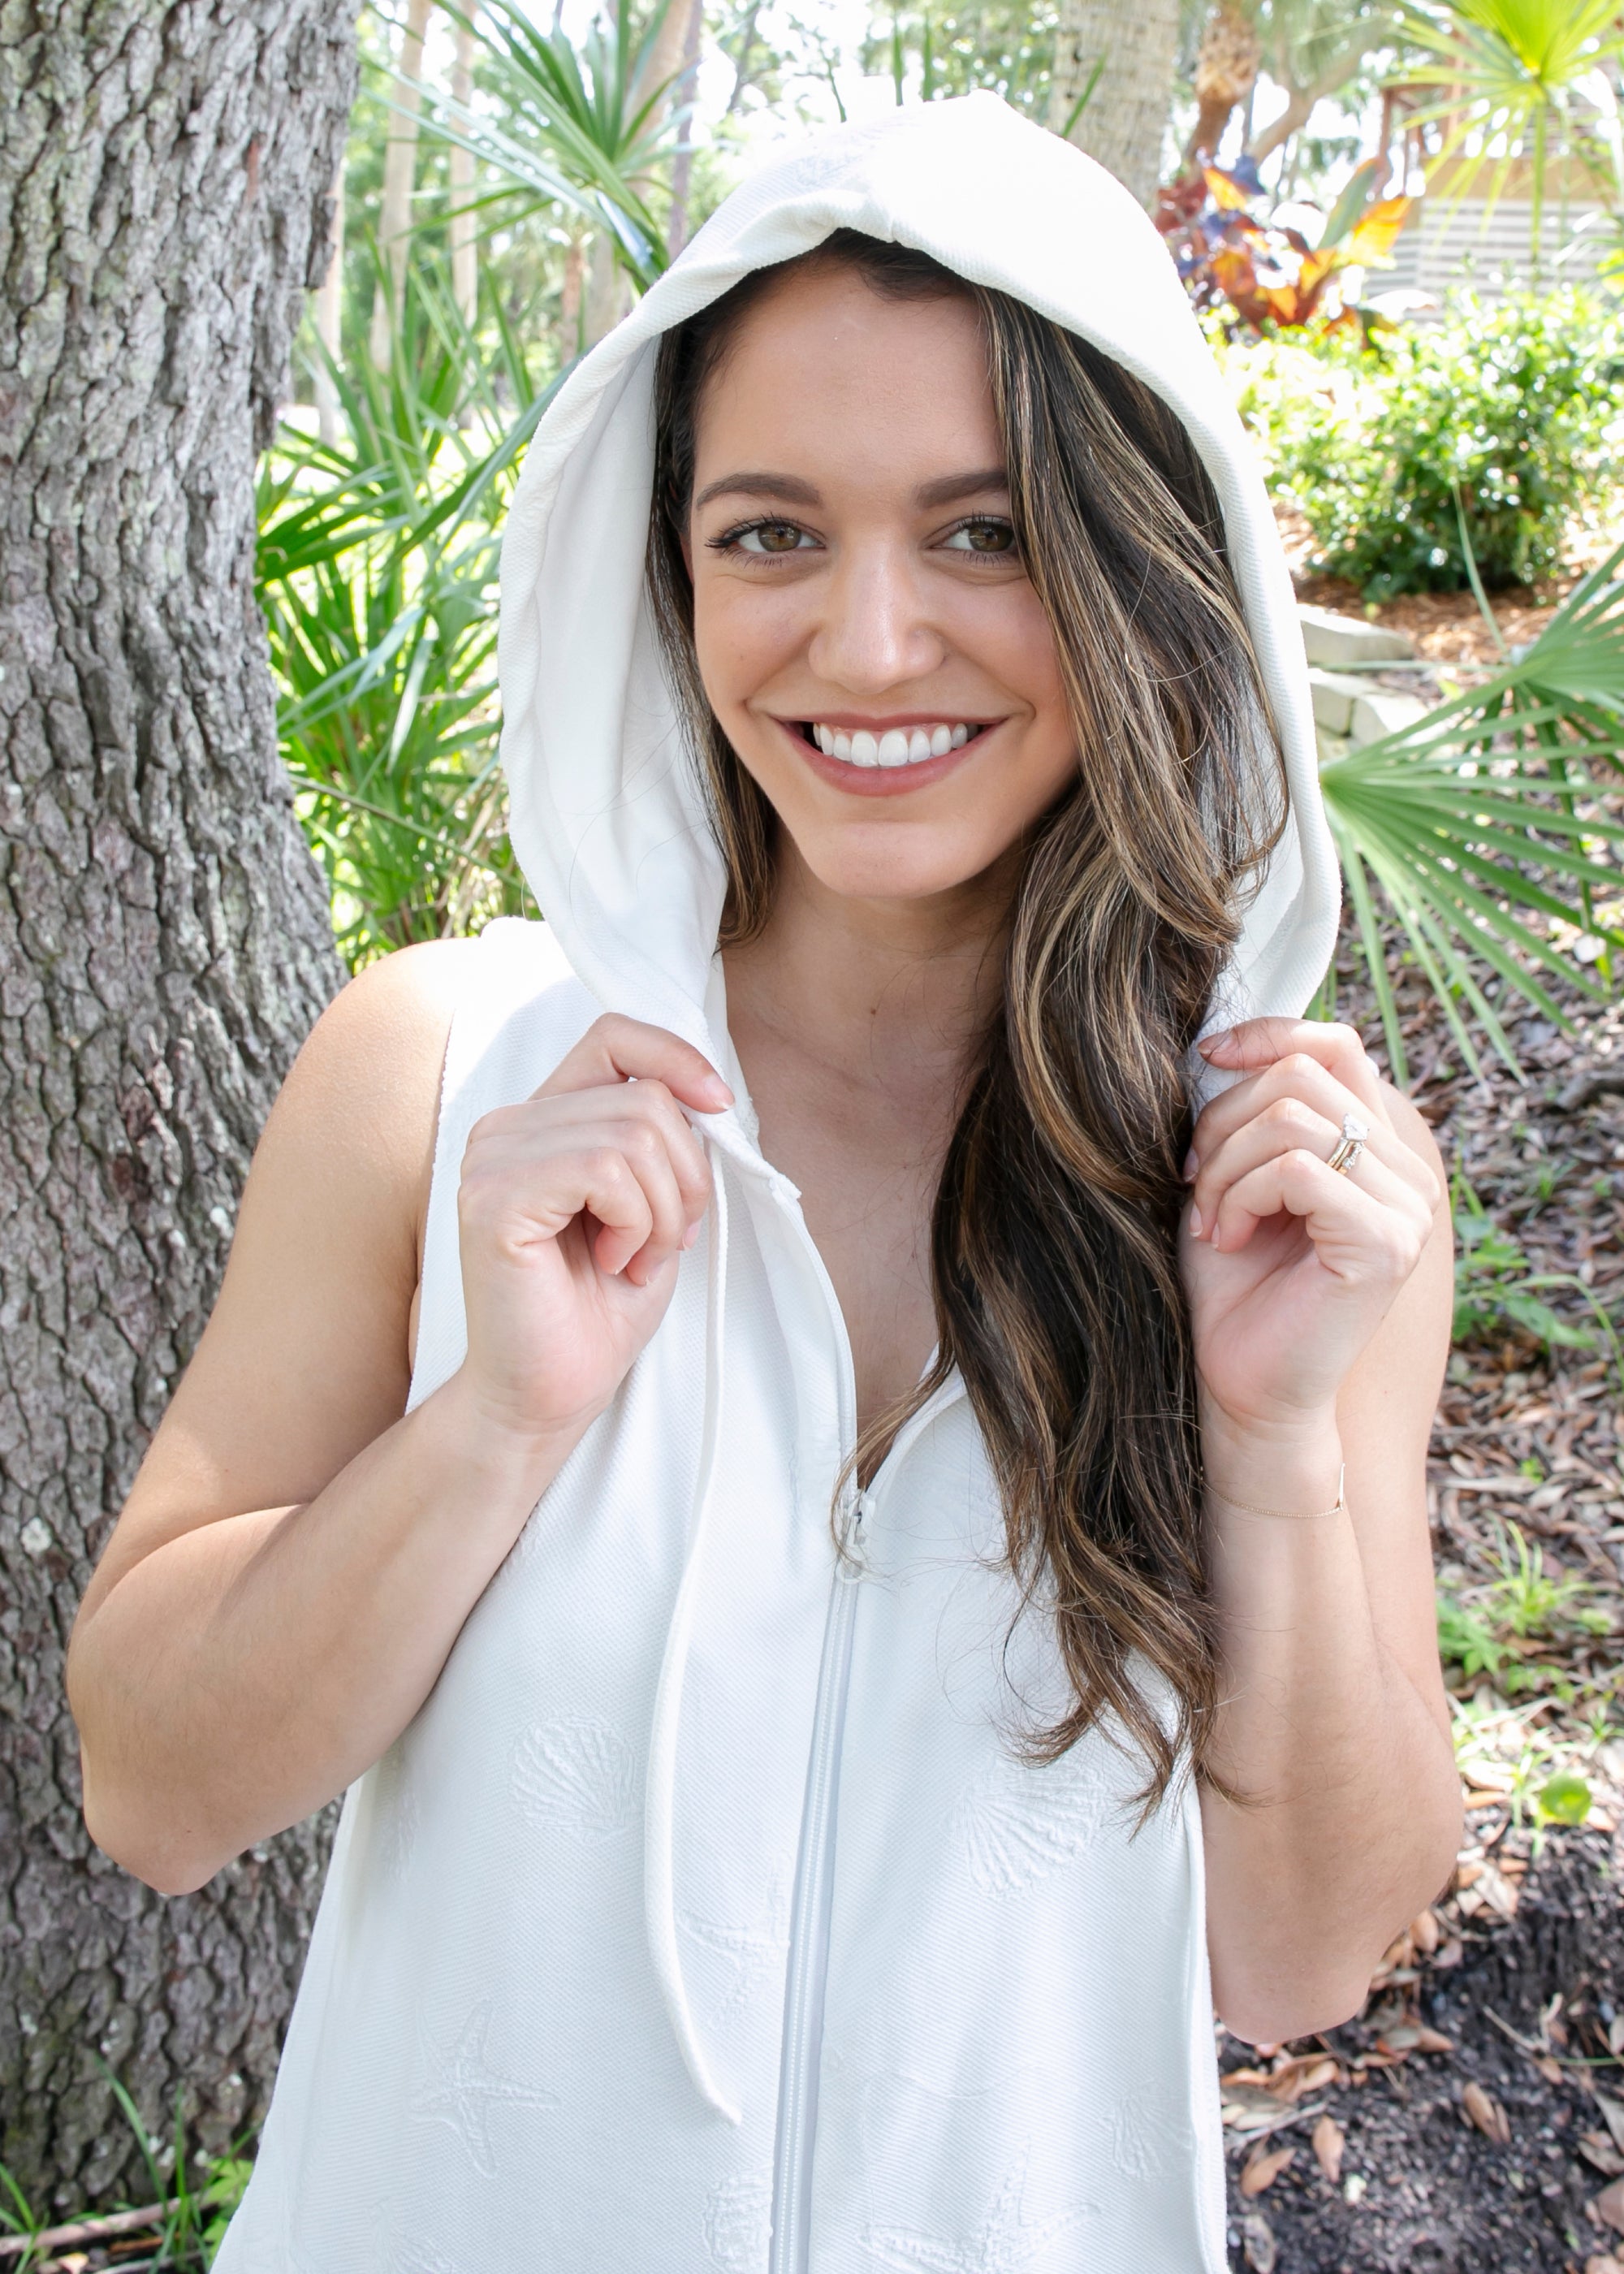 Abby Hooded Tunic Cover Up in White